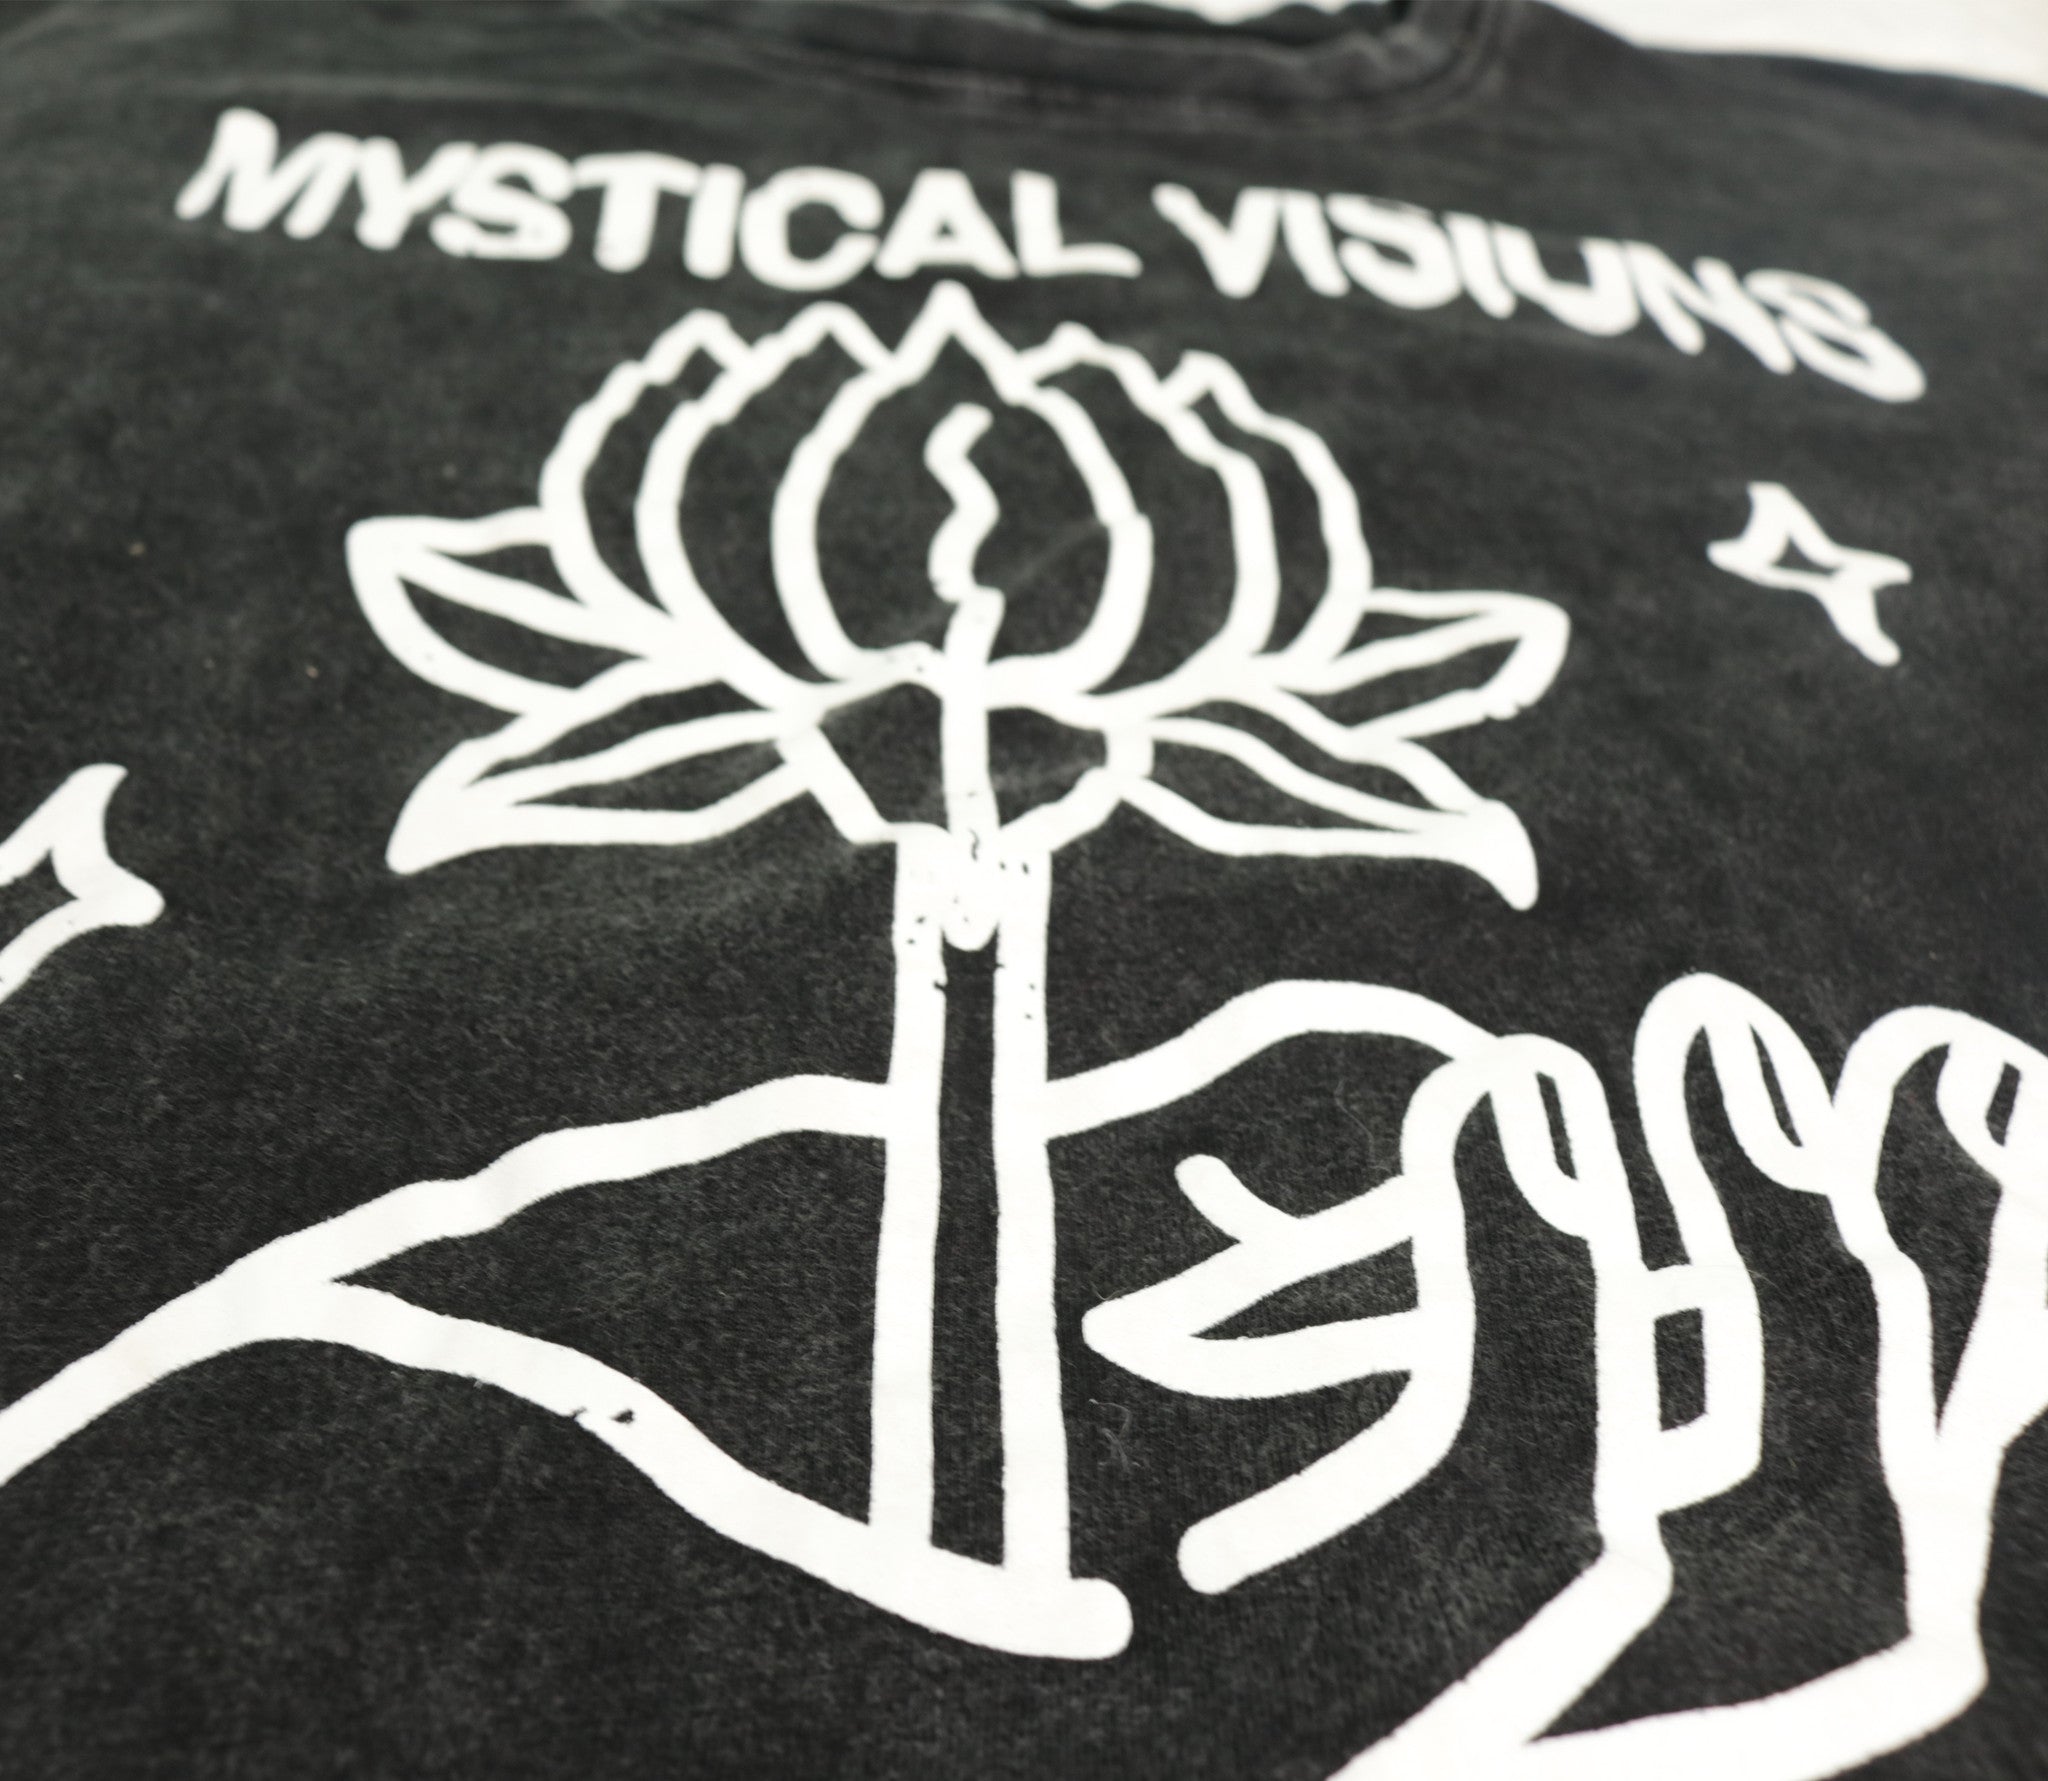 Mystical Visions And Cosmic Vibrations - Oversized Worn Black Shirt